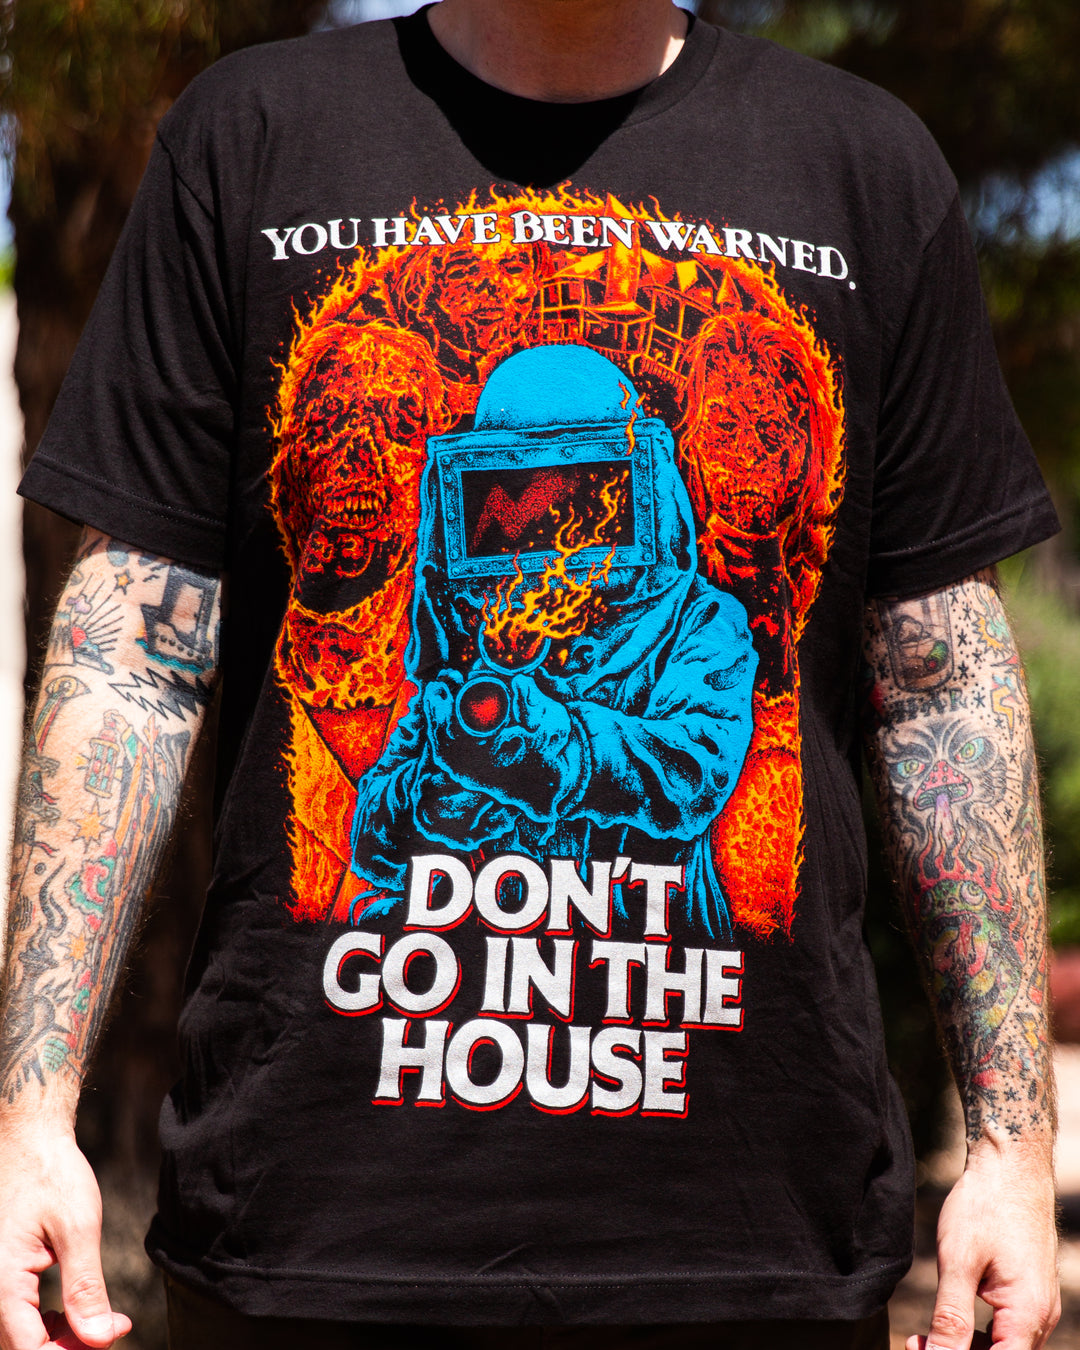 Don't Go in the House [T-Shirt]